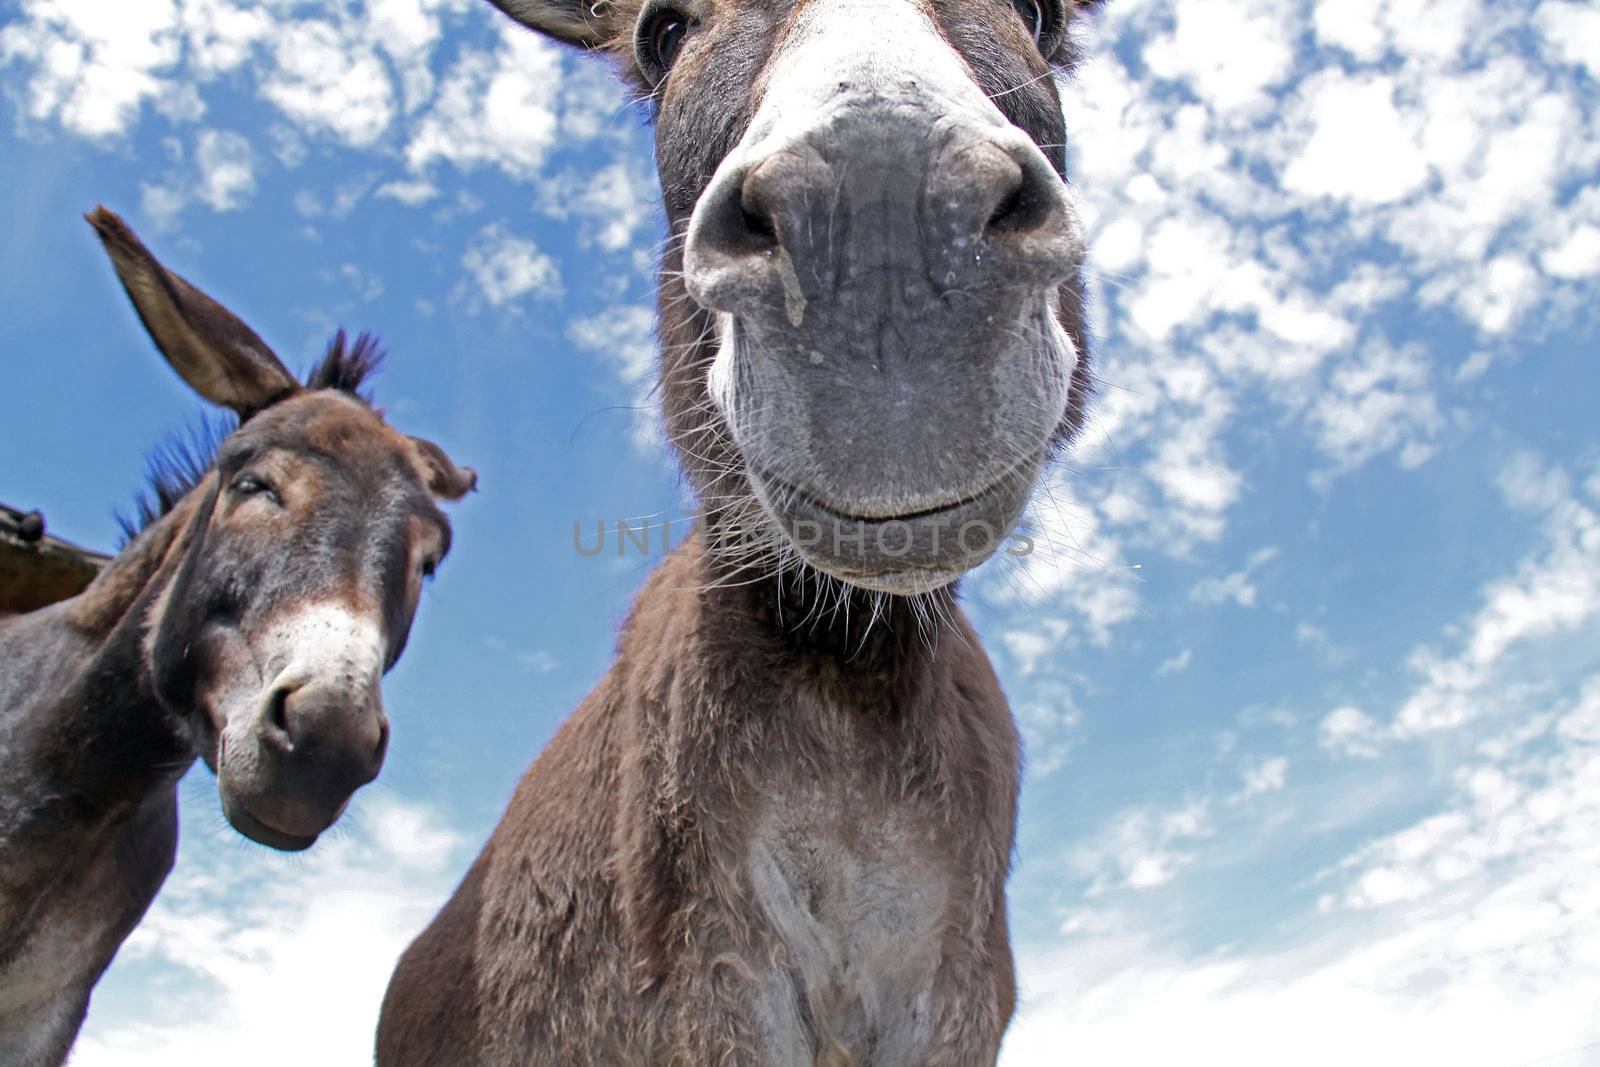 Comical  looking donkey looks in the cam with fun